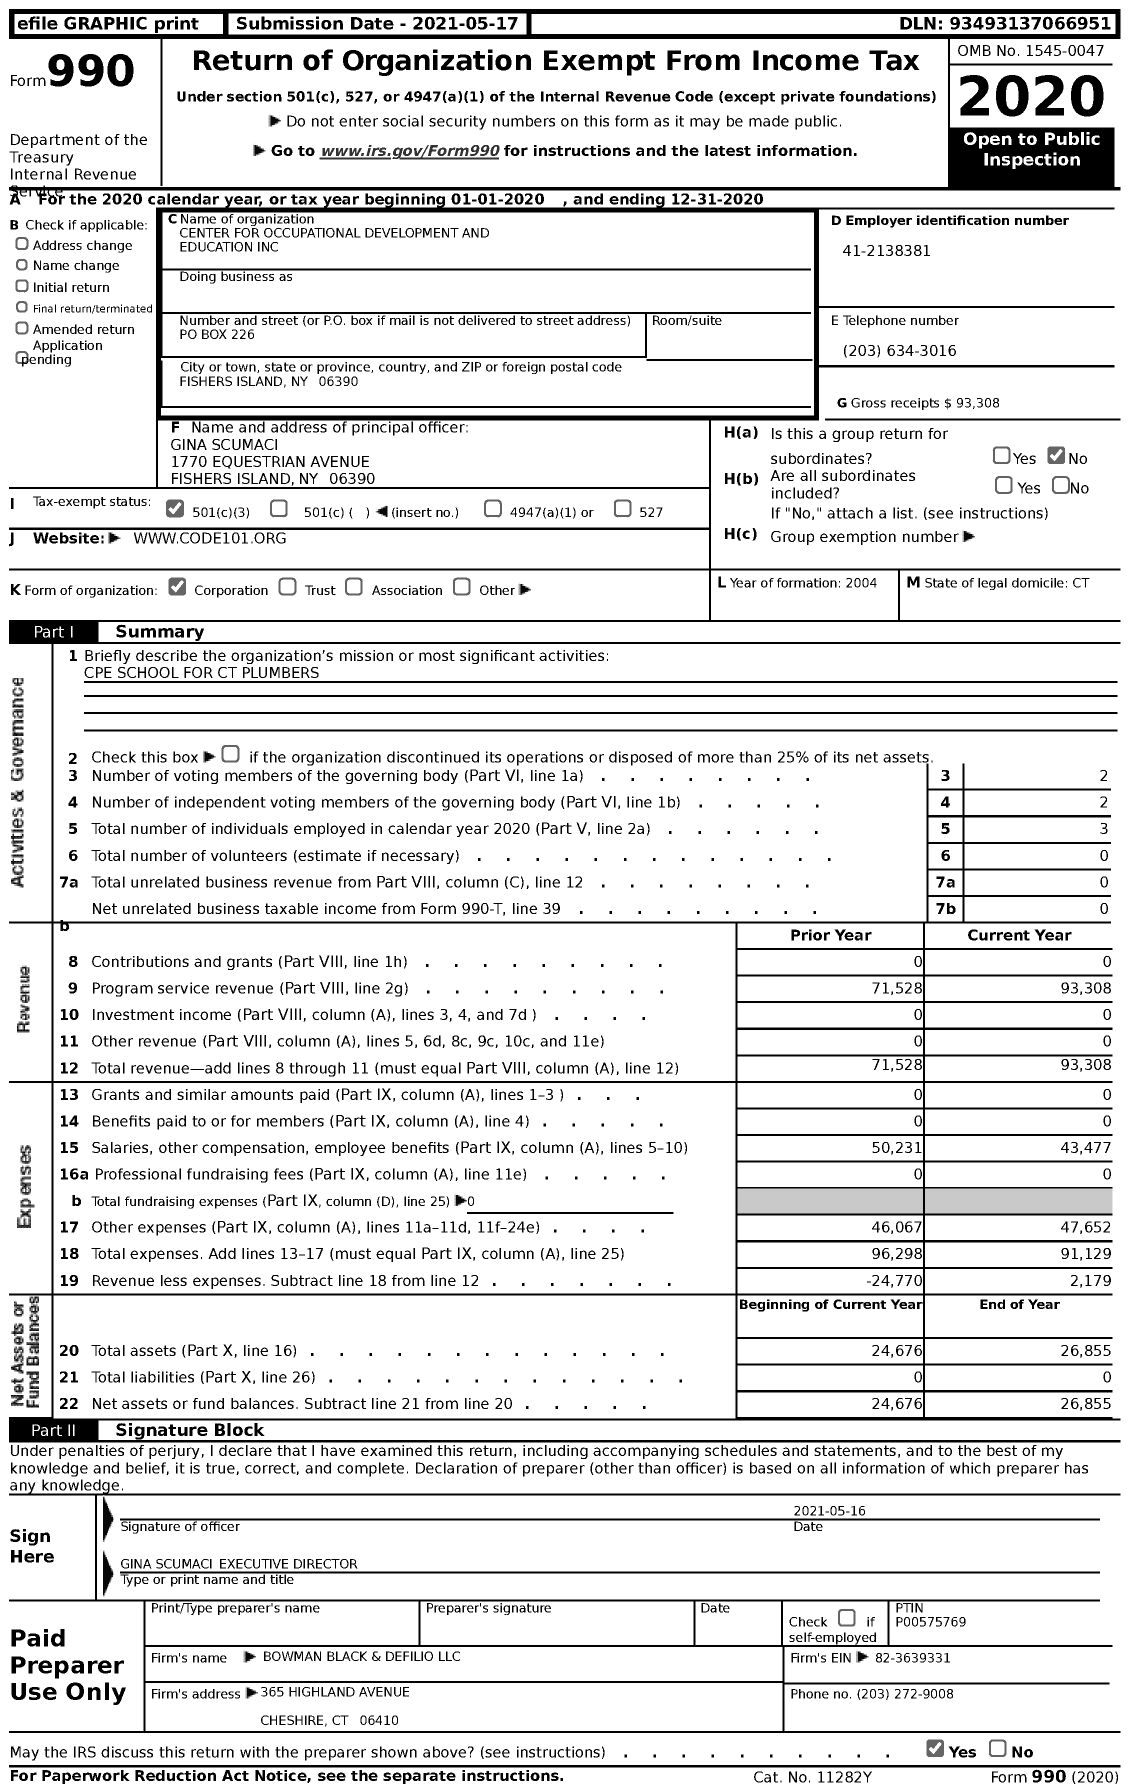 Image of first page of 2020 Form 990 for Center for Occupational Development and Education